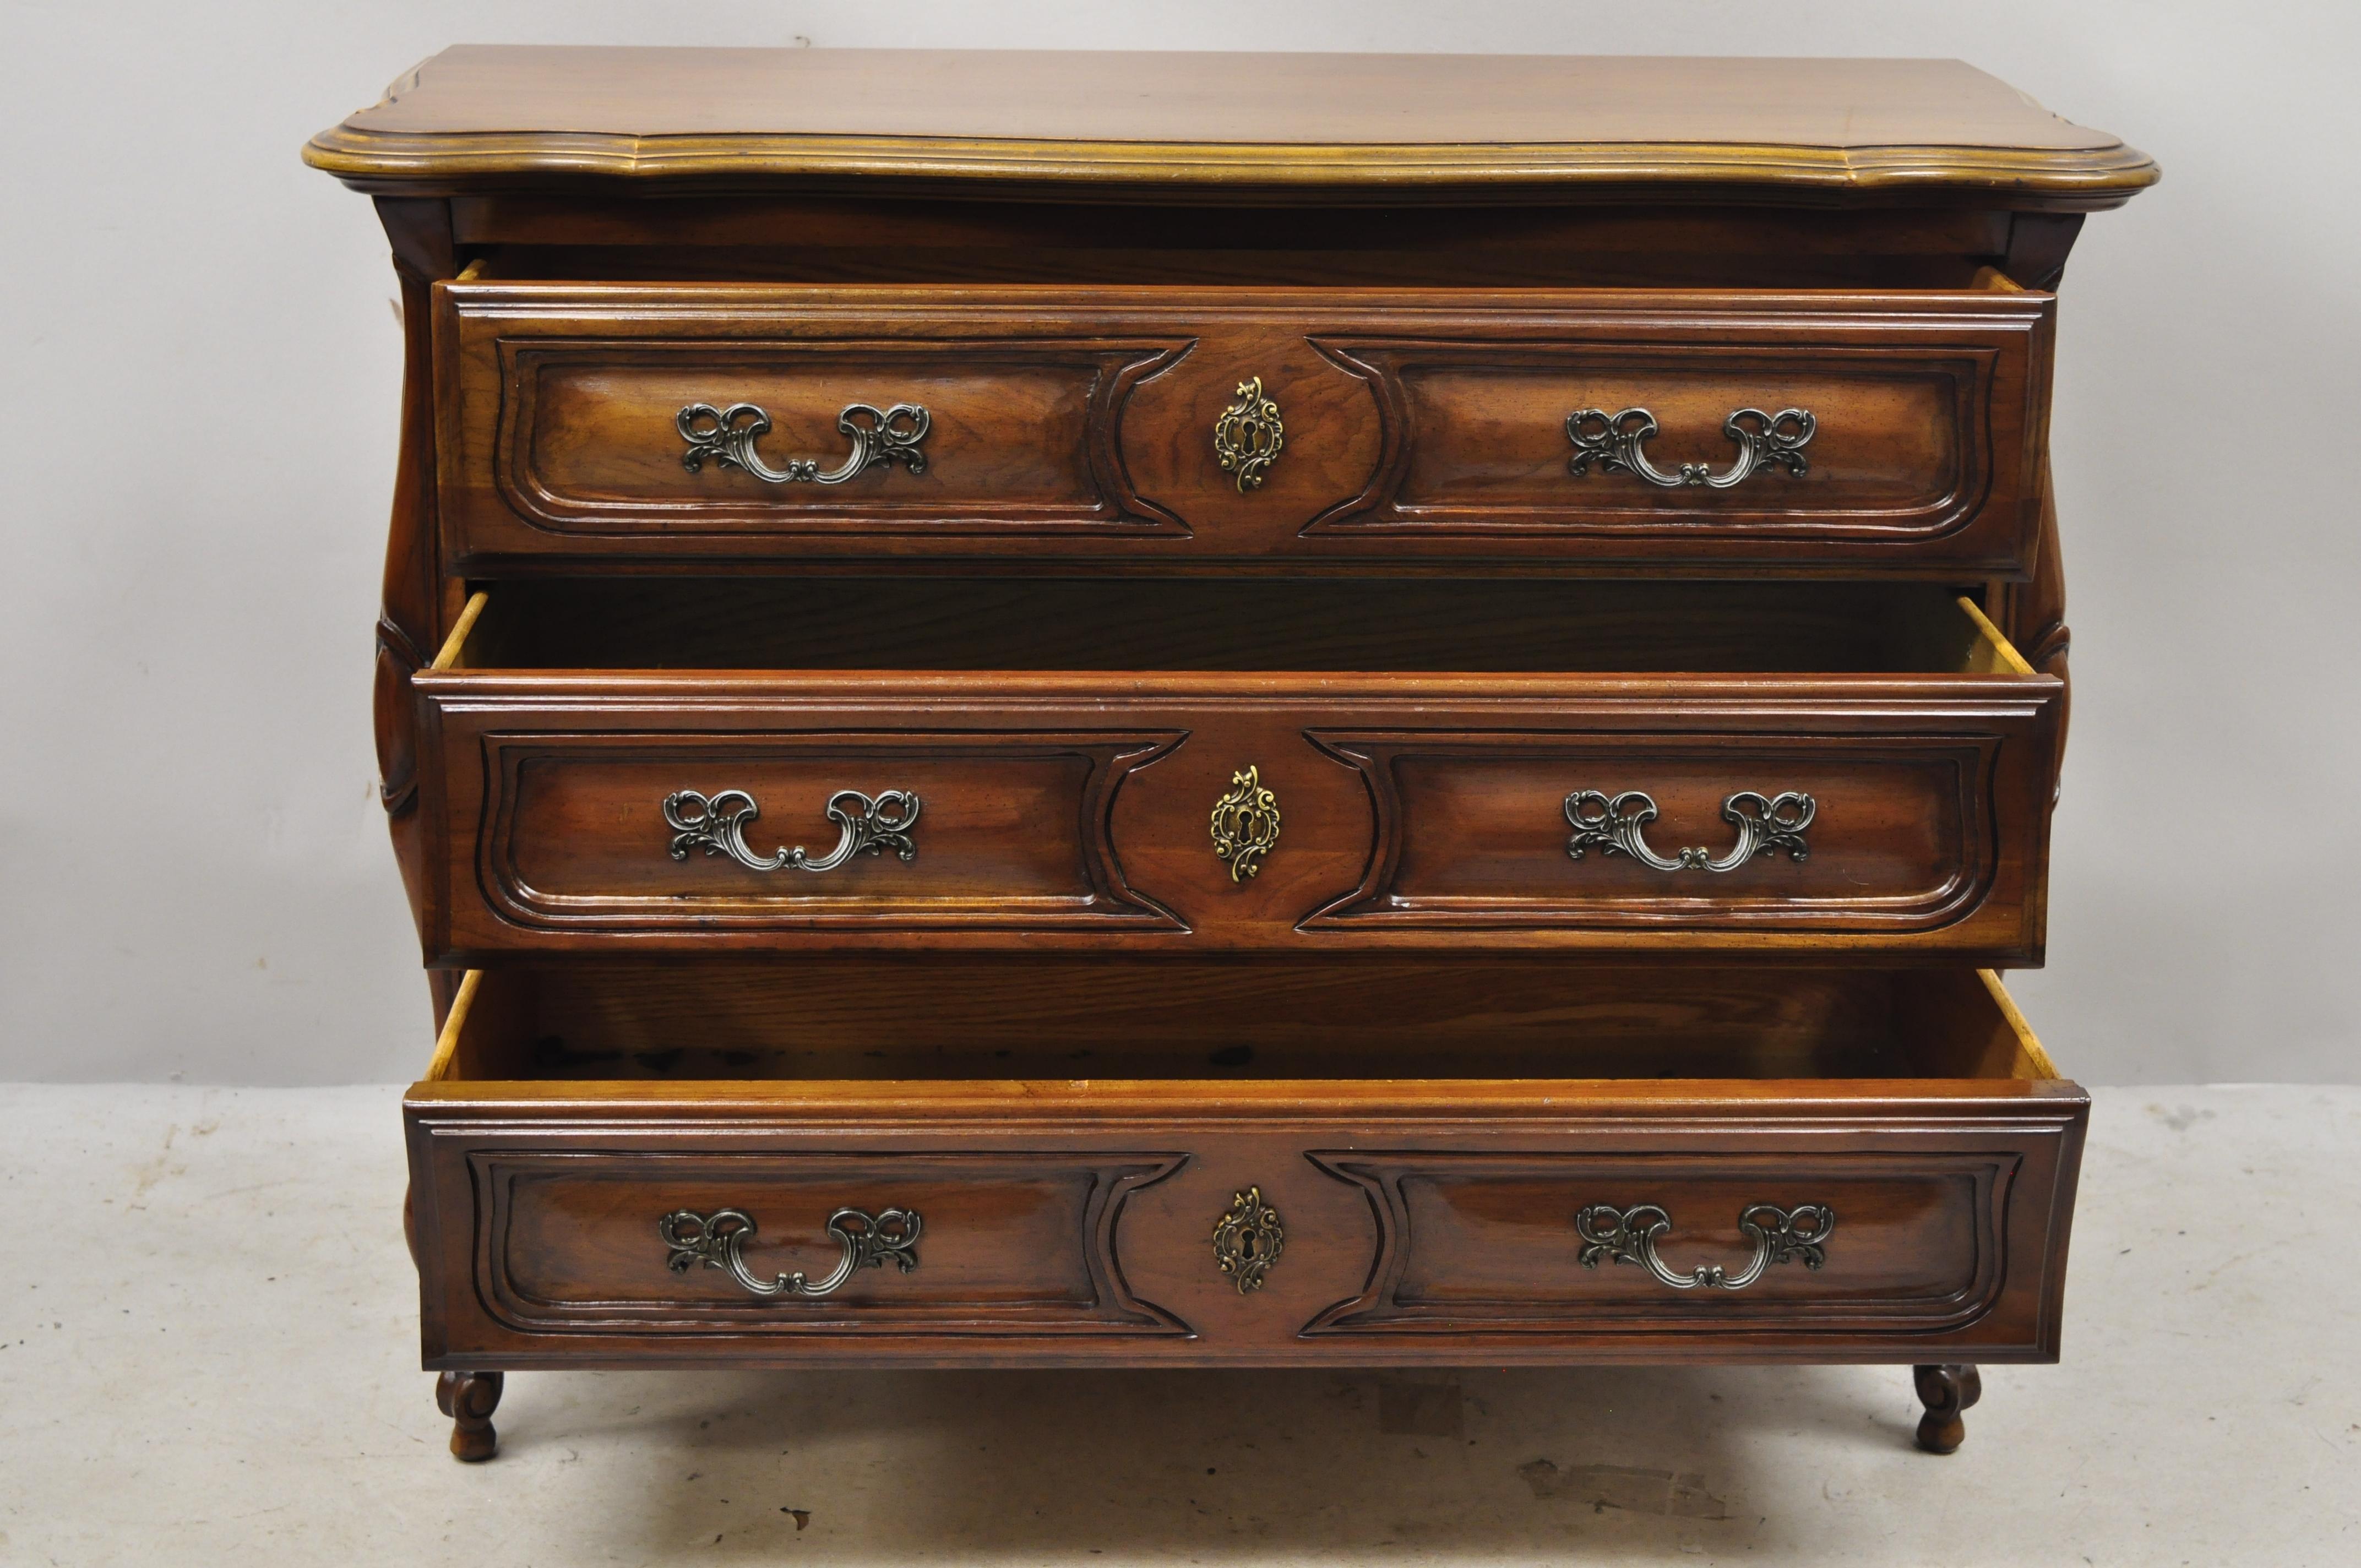 North American French Provincial Louis XV Country Sienna Cherry Bombe Commode Chest Dresser